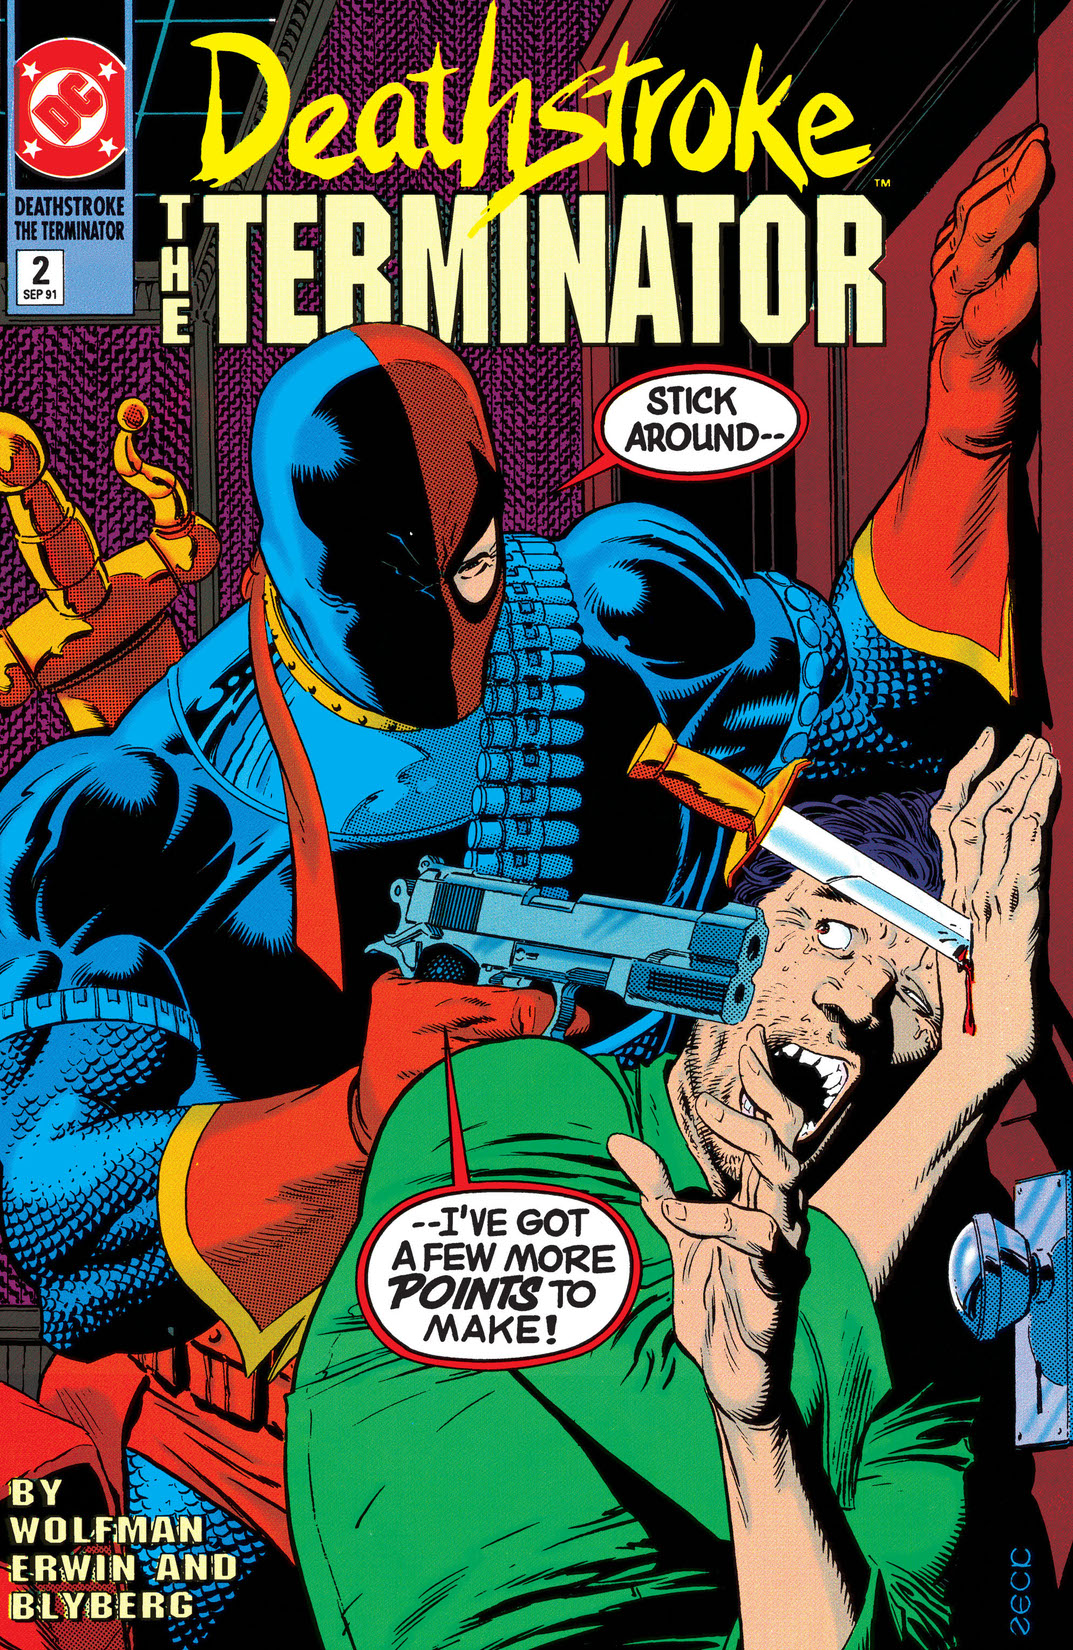 Deathstroke (1991-) #2 preview images